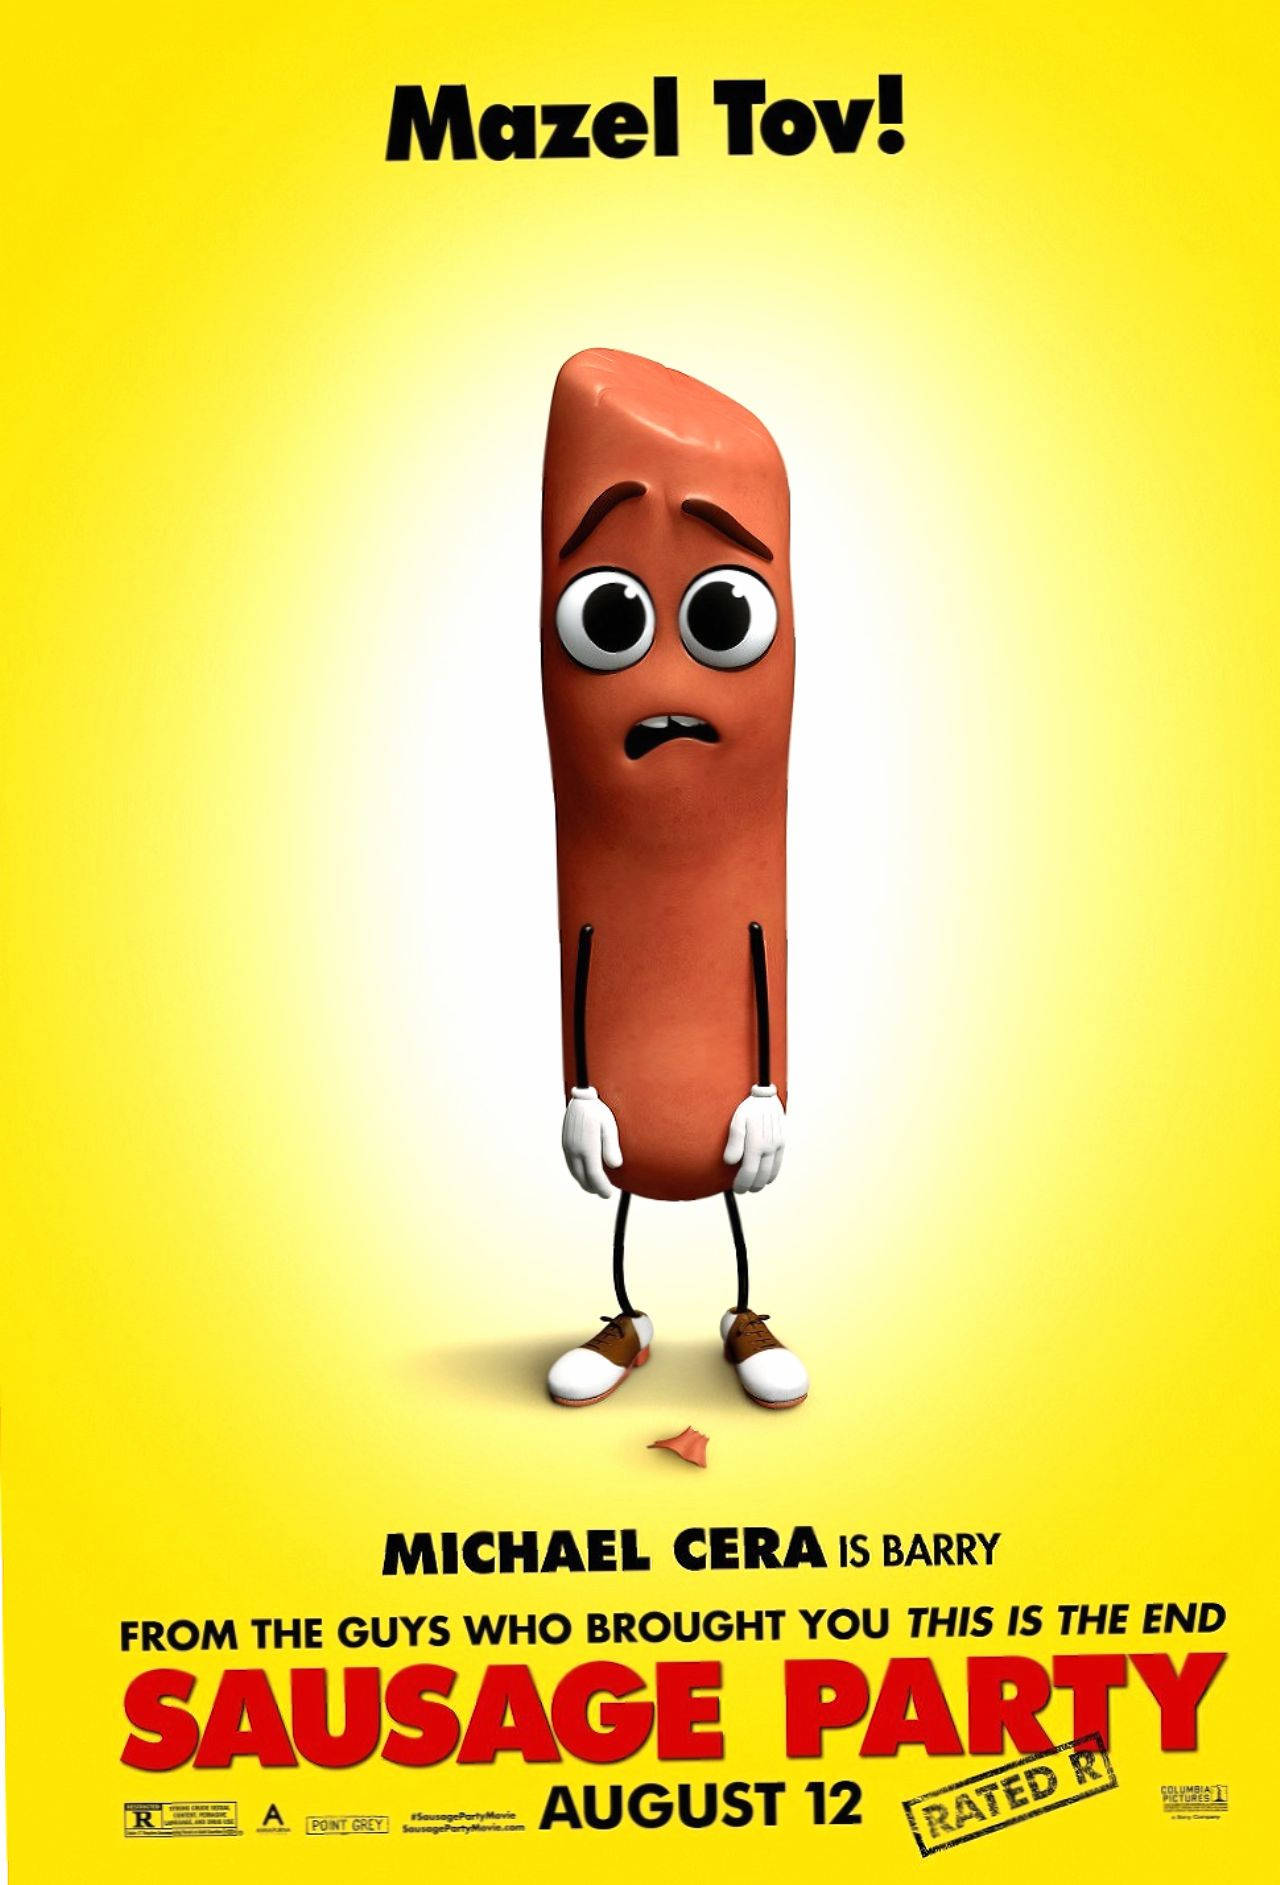 Barry Sausage Party Poster Wallpaper